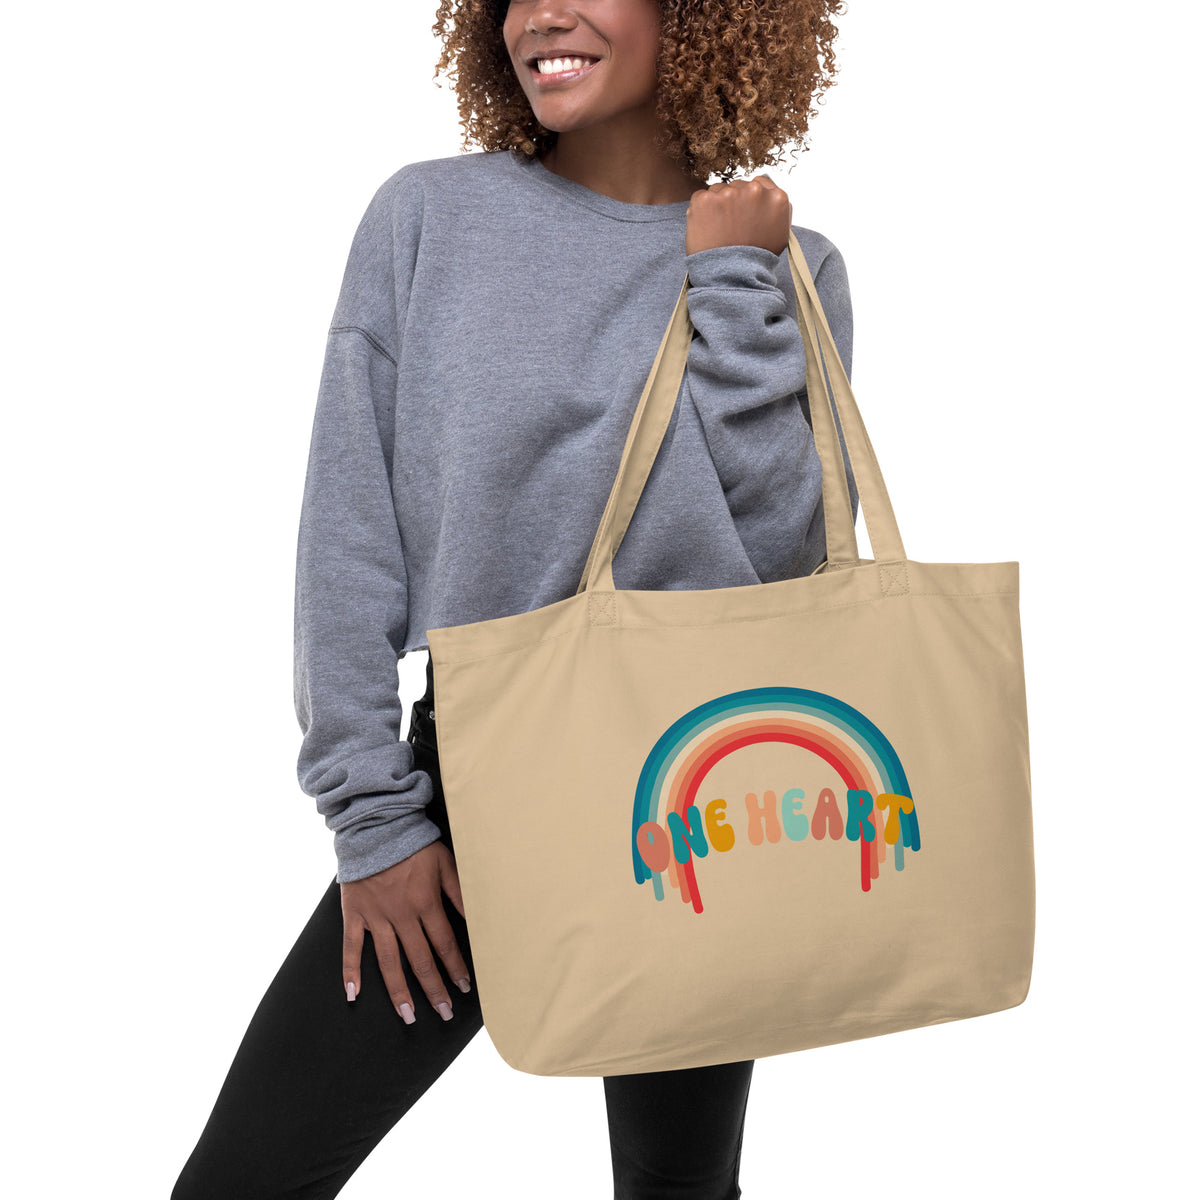 One Heart Eco Tote